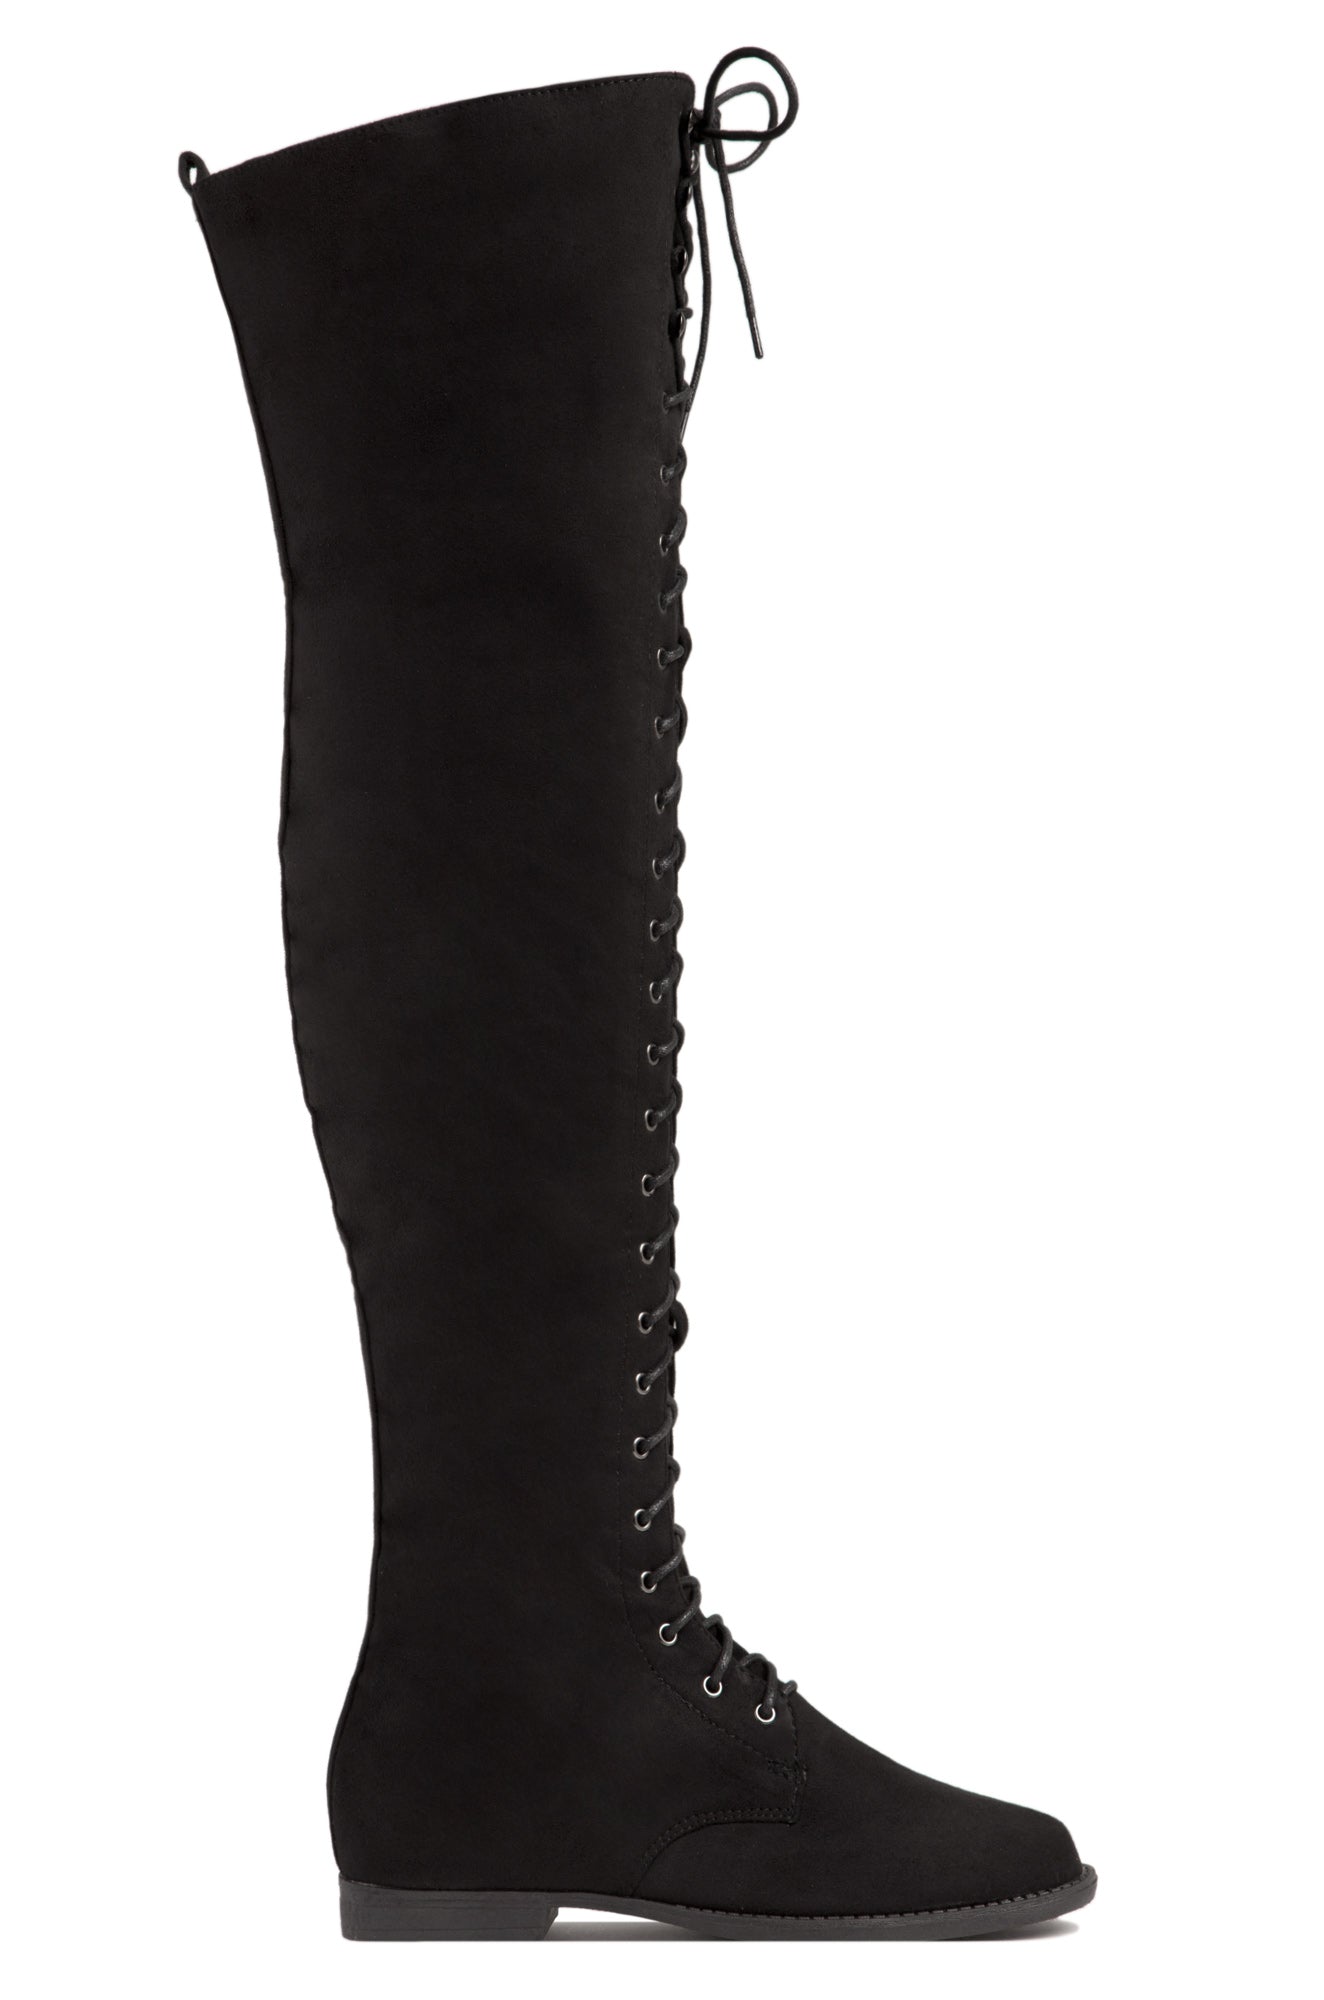 Miss Lola | Black Over The Knee Lace Up Boots – MISS LOLA